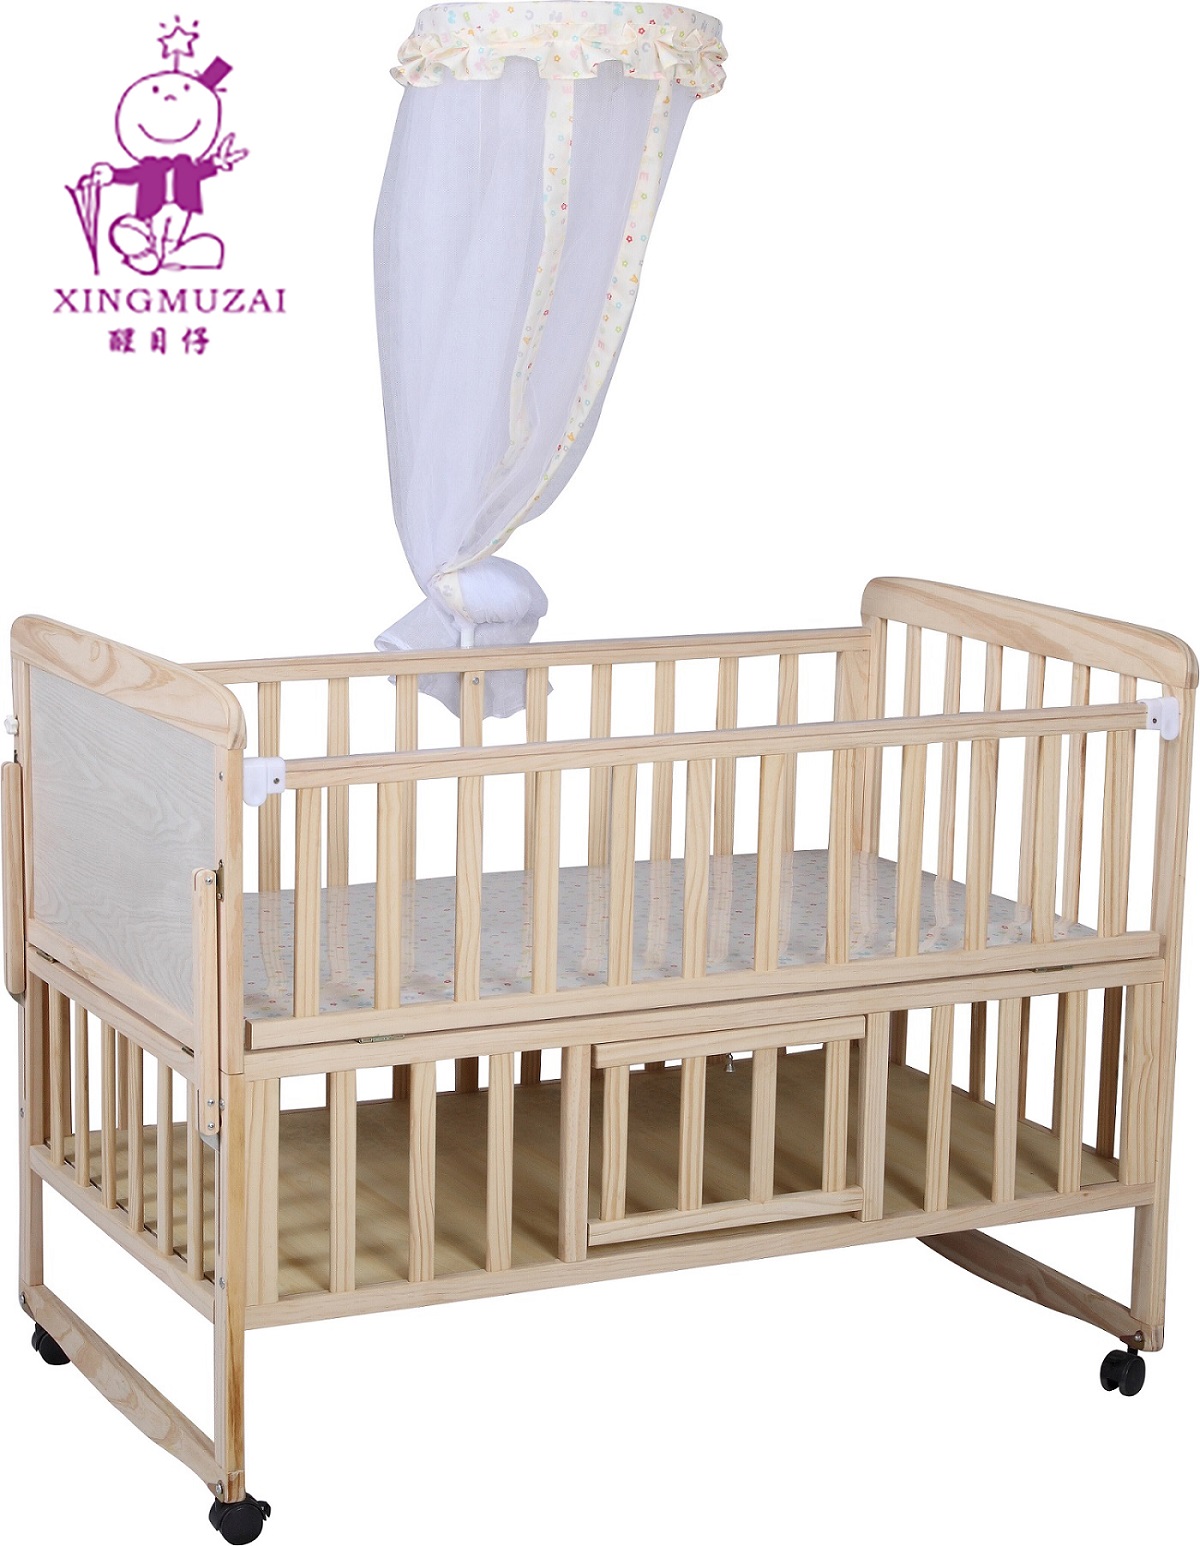 Top quality classic baby bed luxury 5455-1